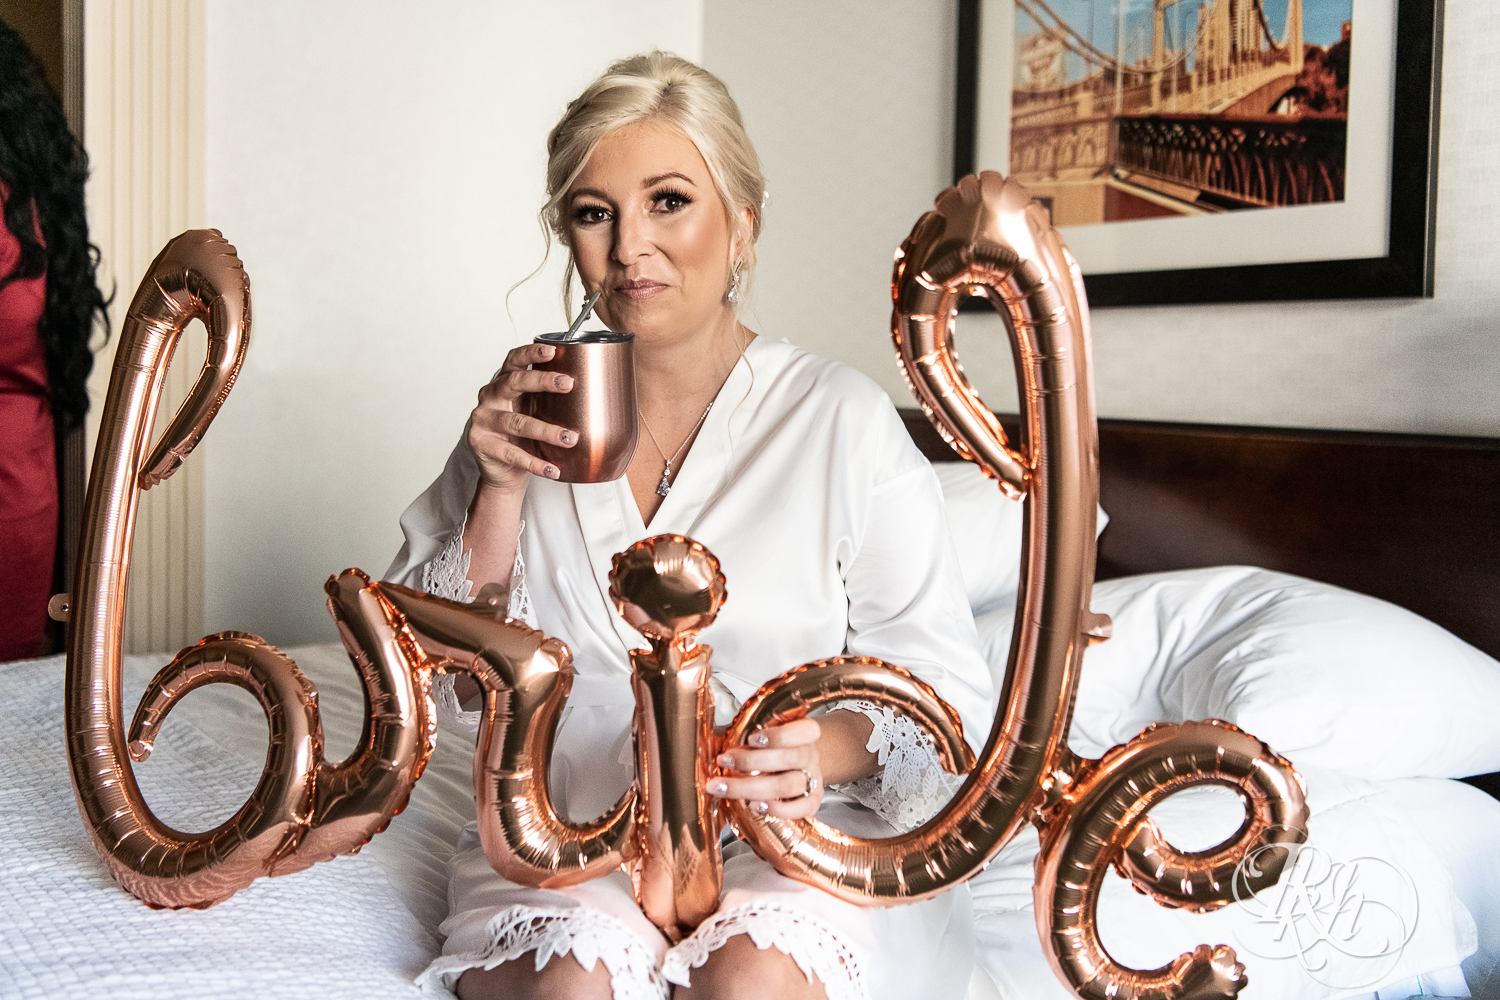 Bride holding bride balloon and drinking Moscow Mule